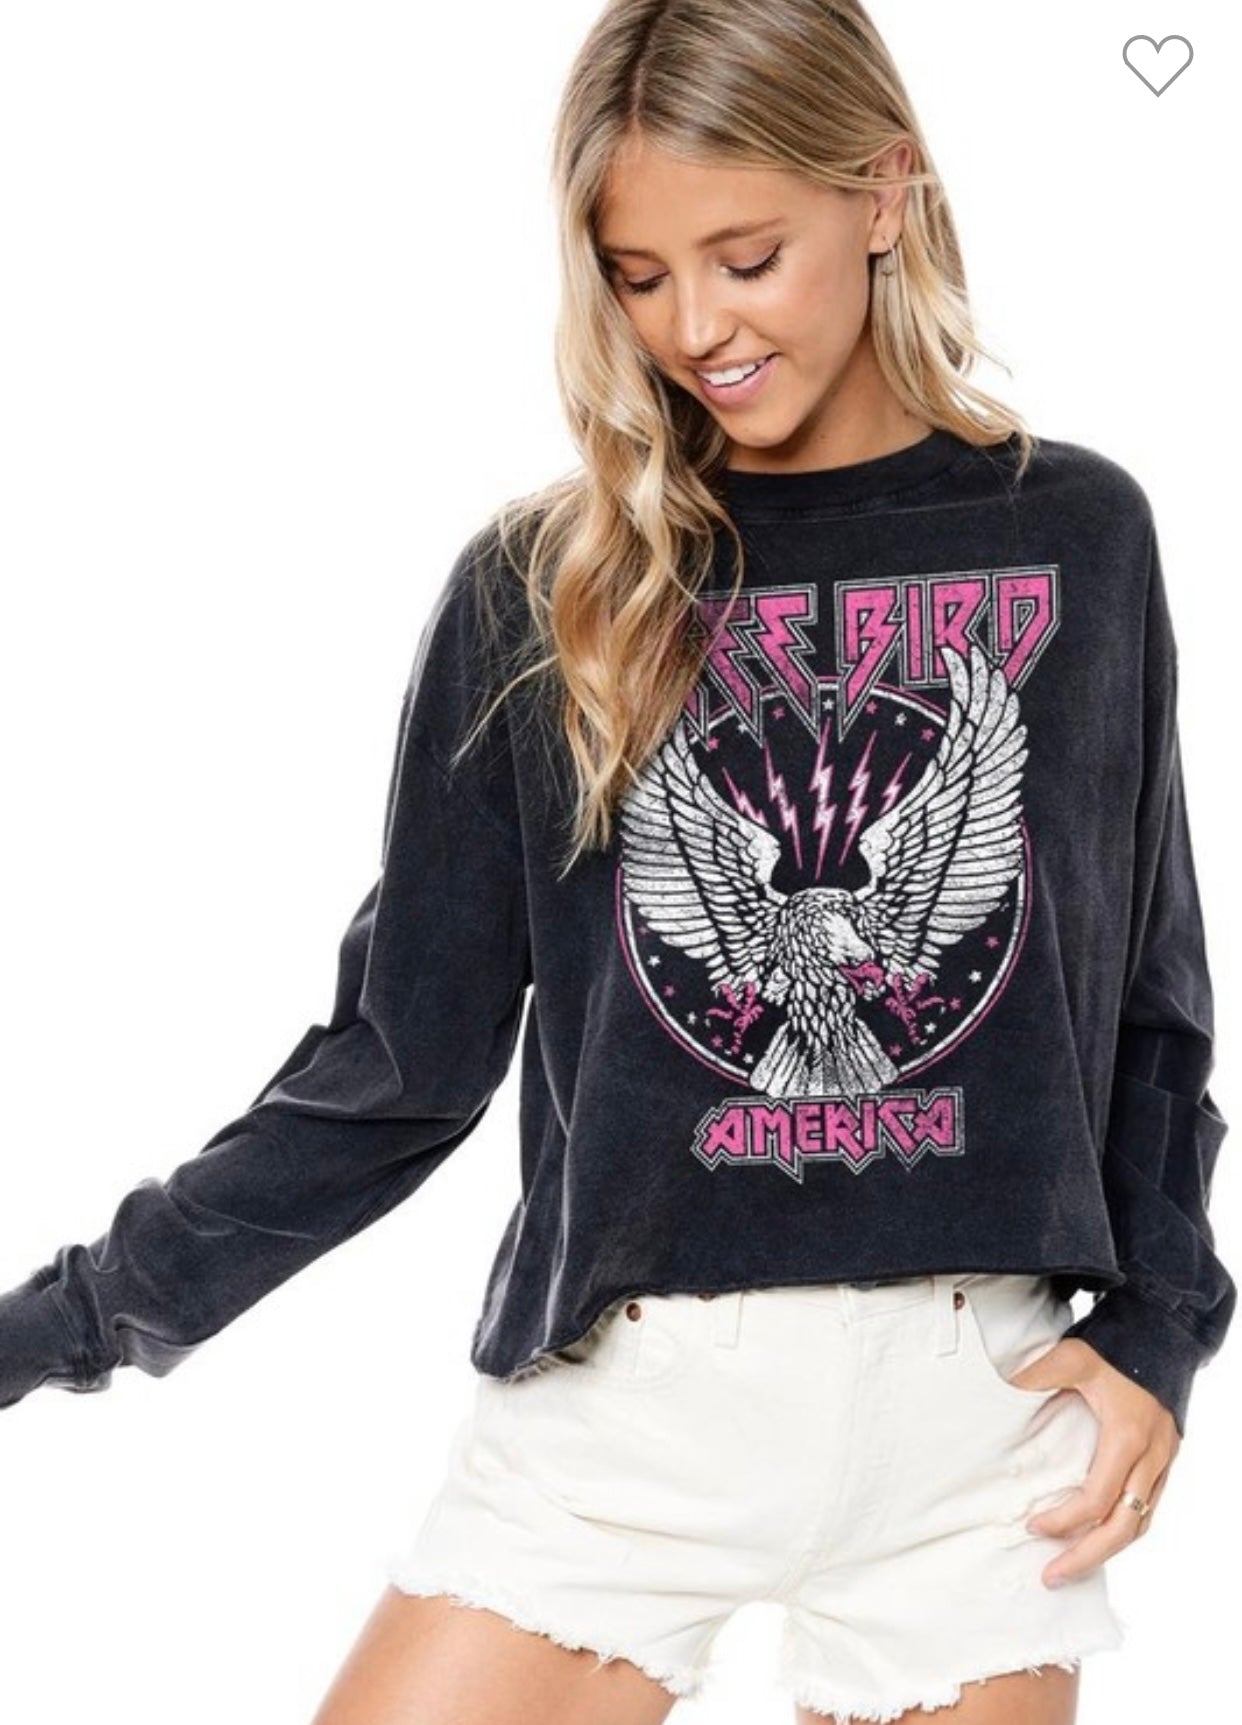 Free Bird Cropped Graphic Tee